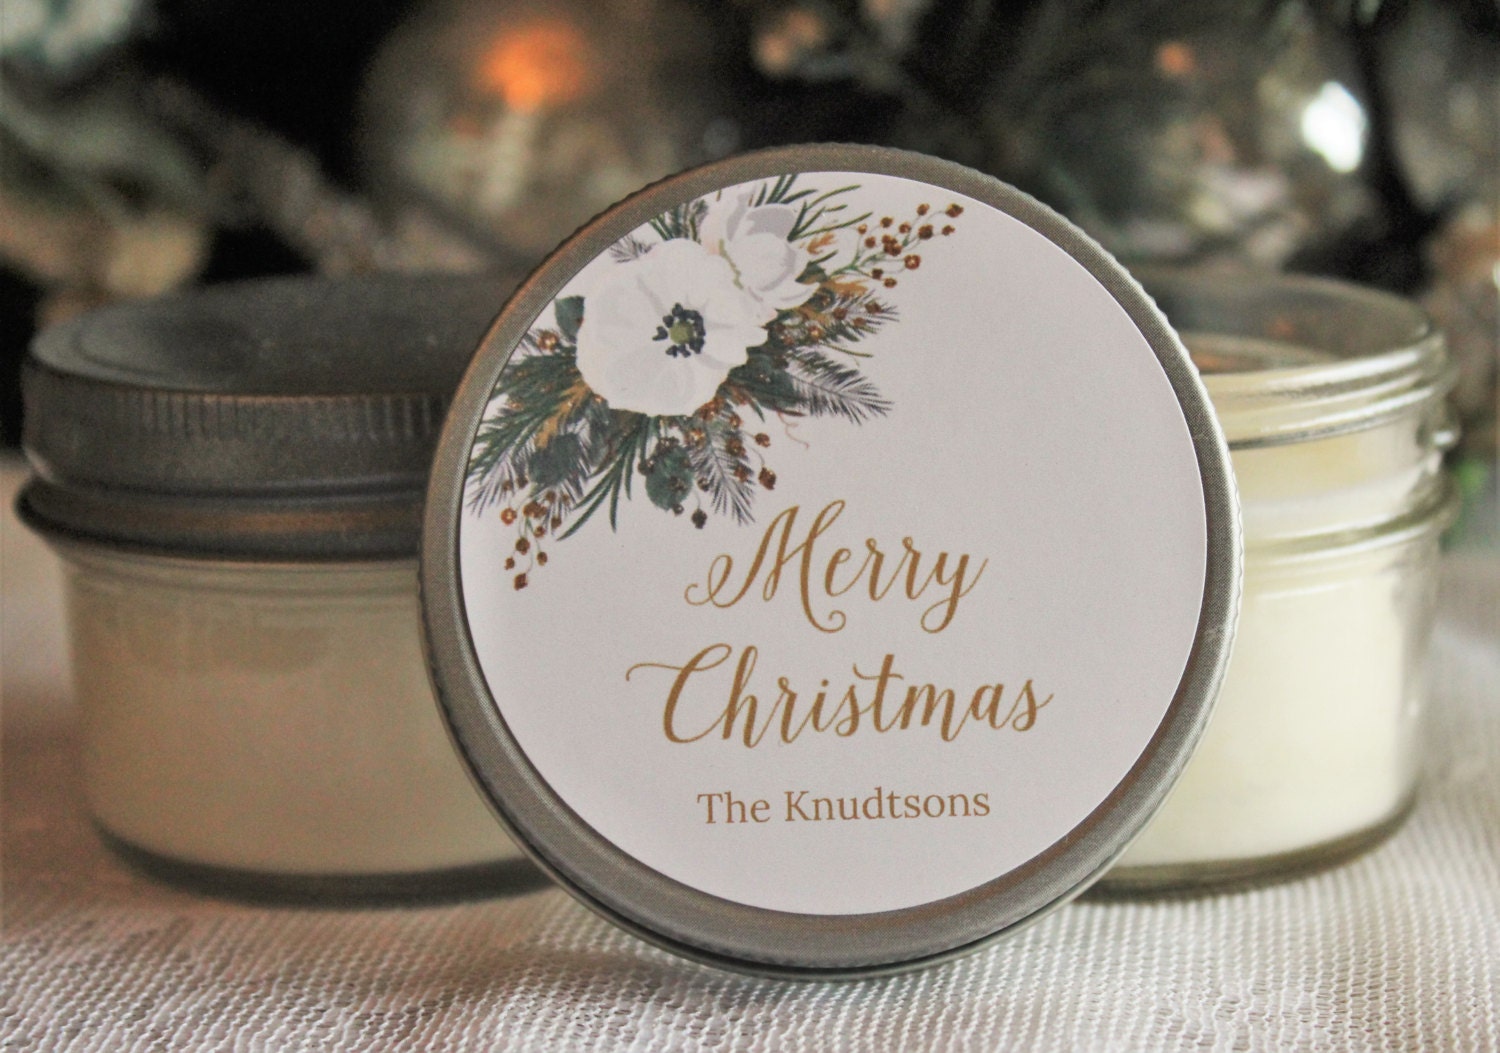 Christmas Candle Favors Holiday Gift and Decor Cute and Festive